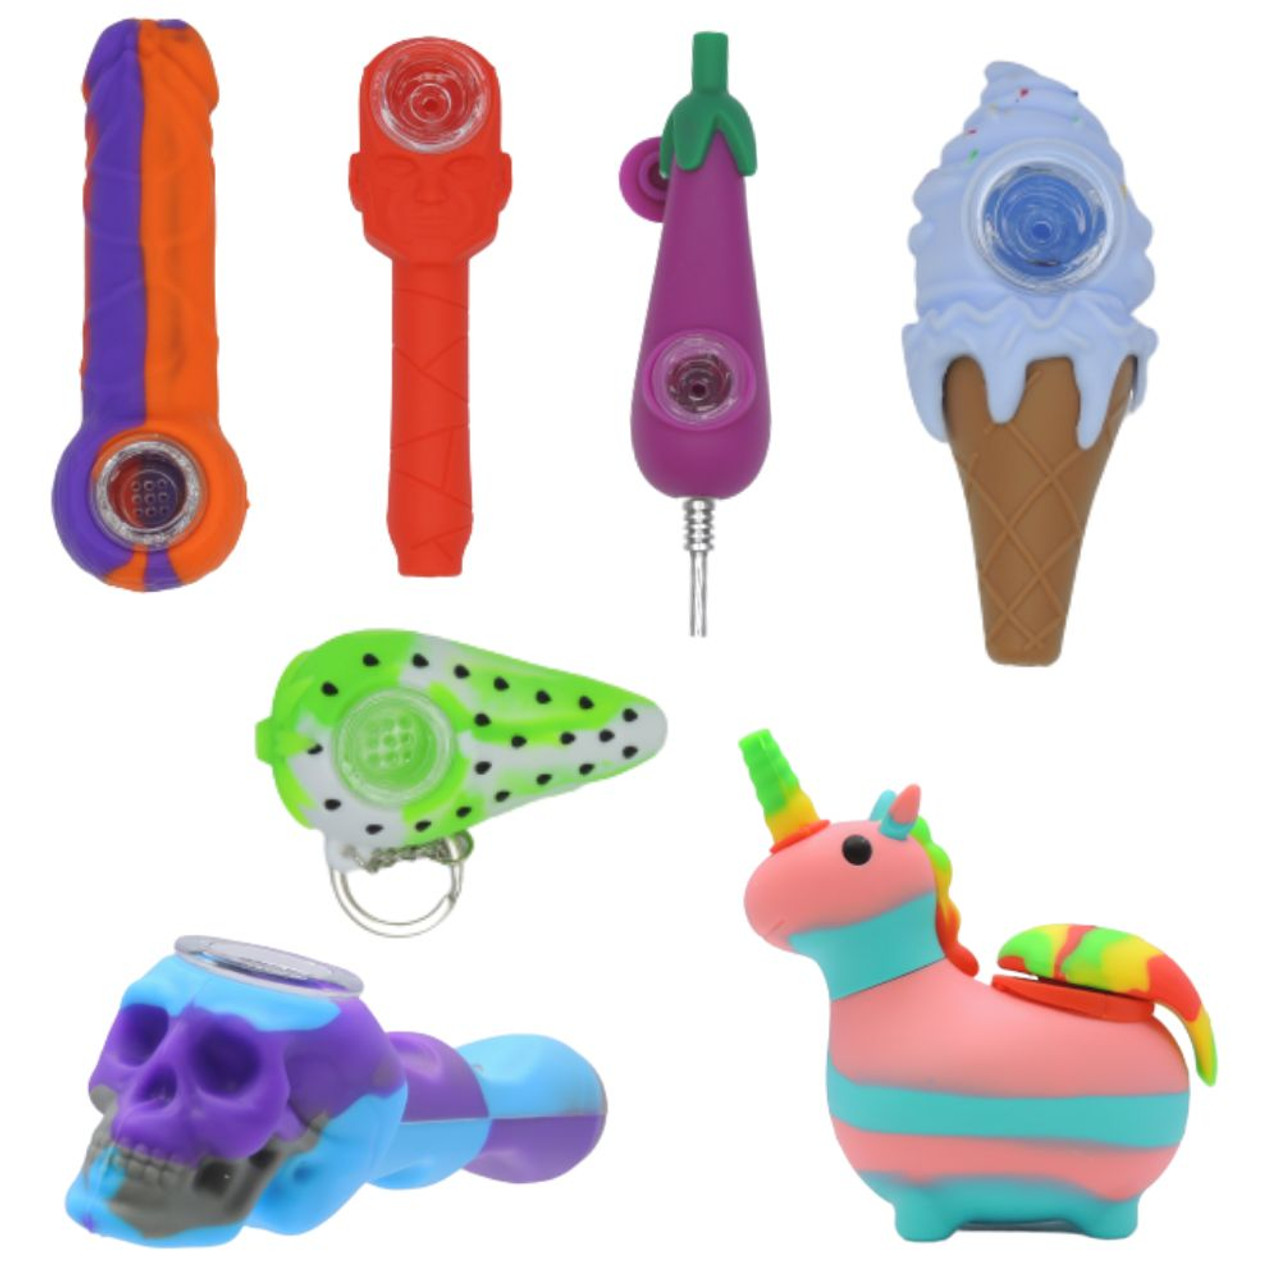 Assorted Novelty Silicone Pipes - 14 ct.